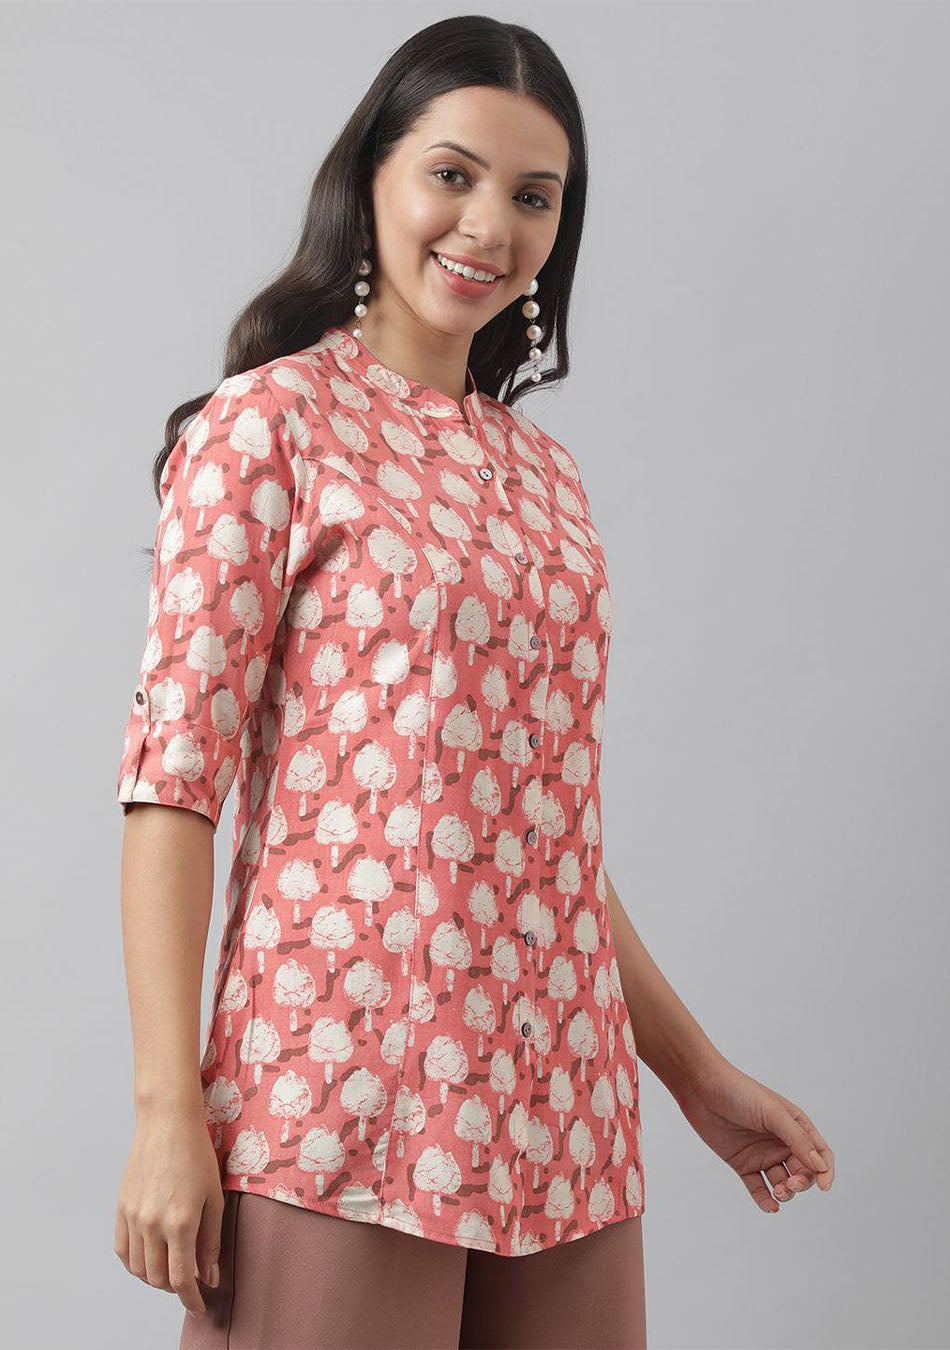 Peach Floral Printed Rayon A-line Shirt Style Top